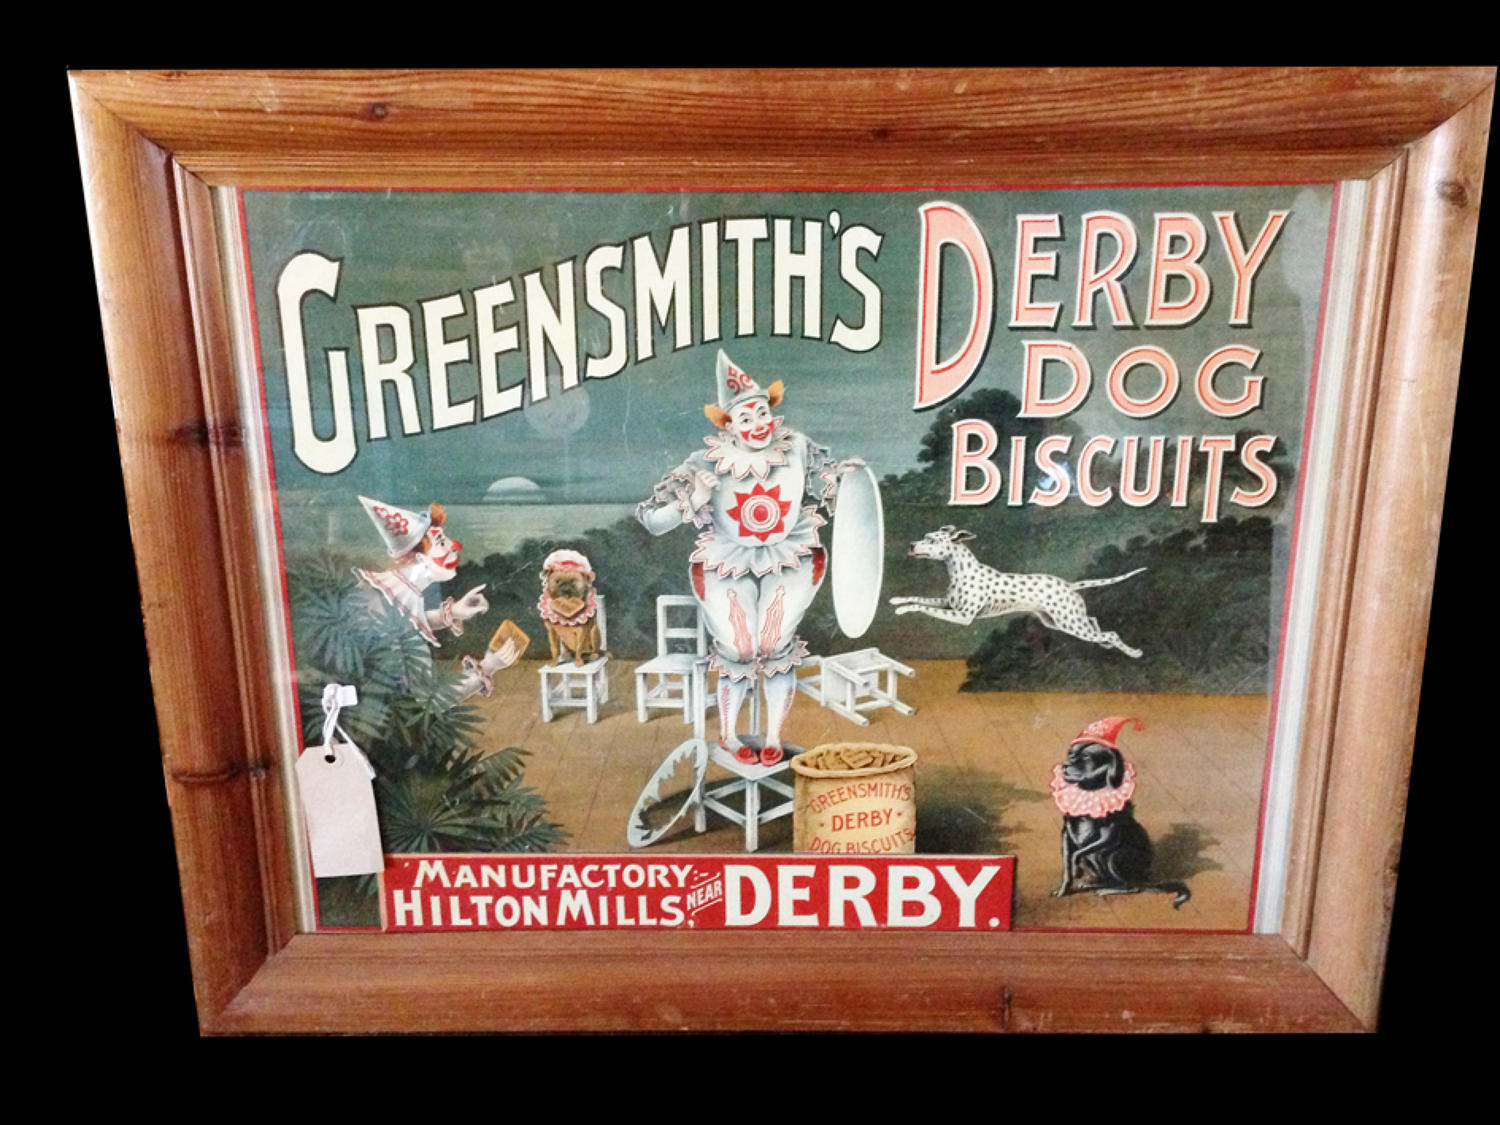 Greensmith's Dog Biscuits Show Card